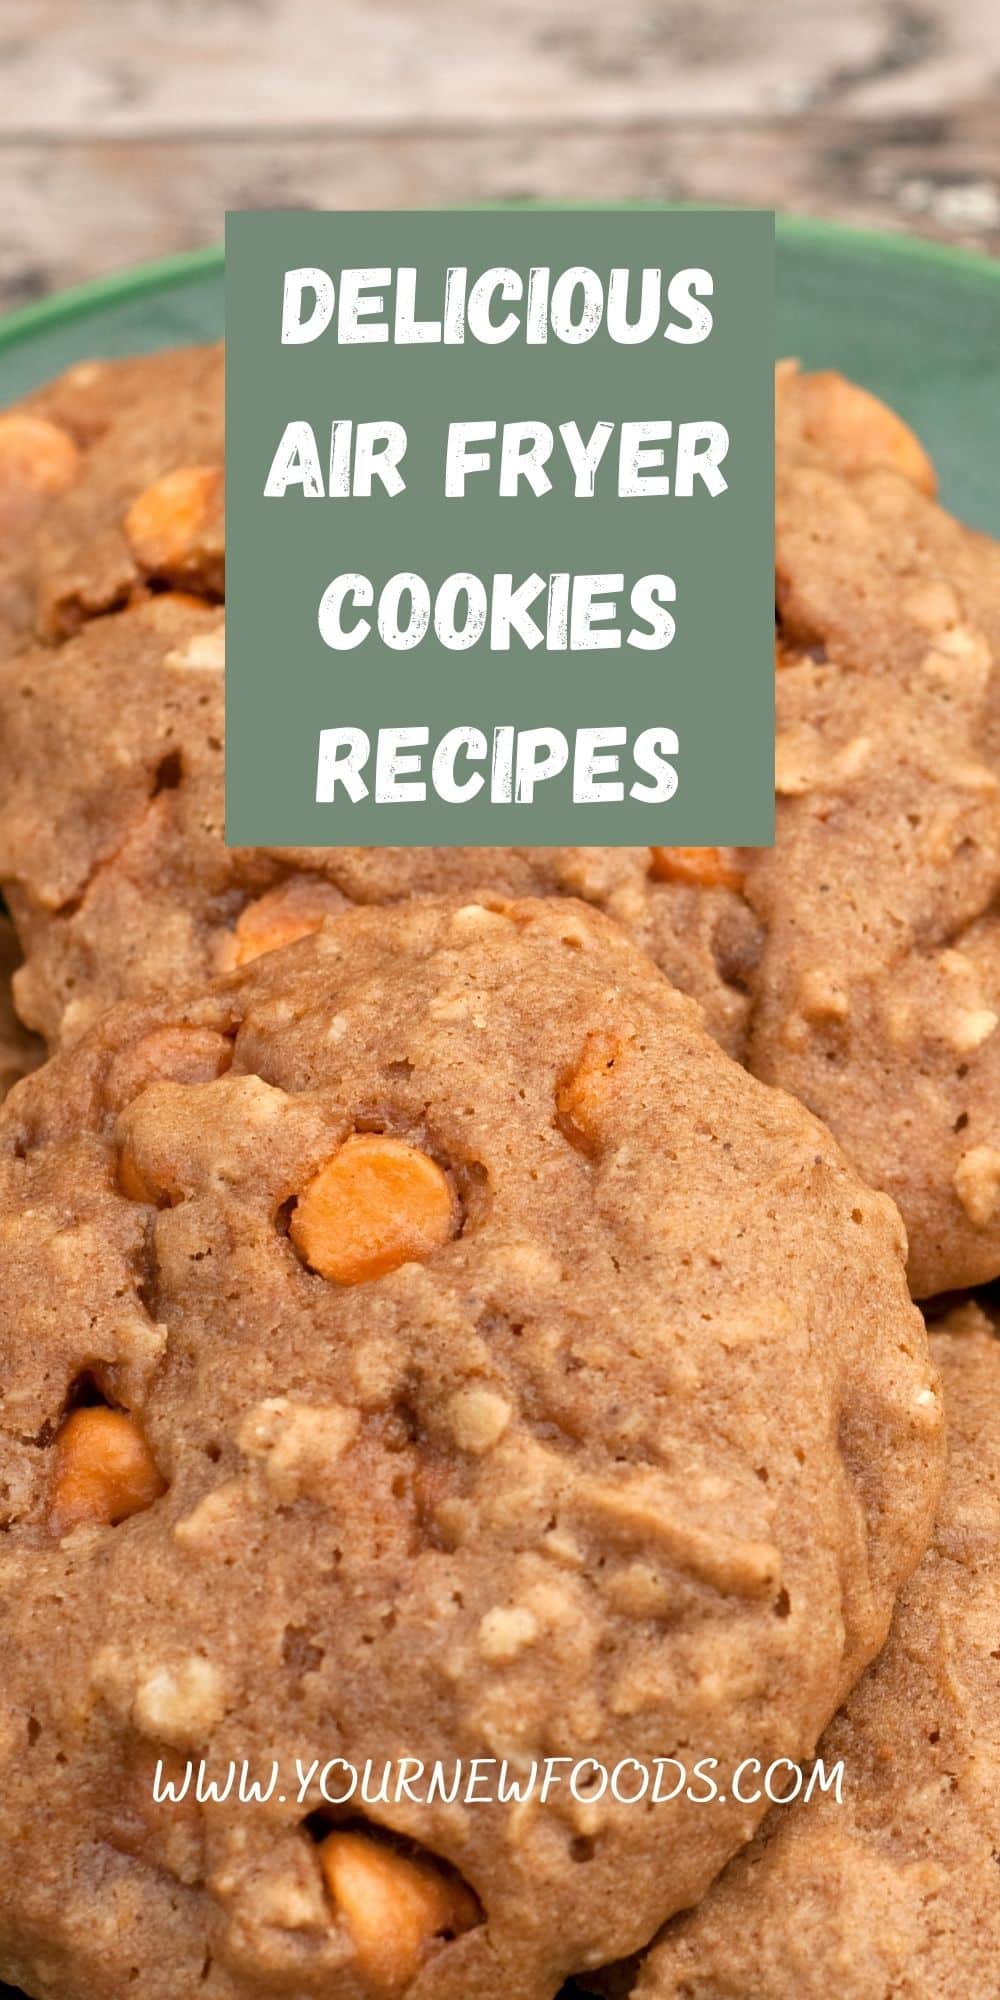 Air Fryer Cookies Recipes showing delicous oatmeal cookies